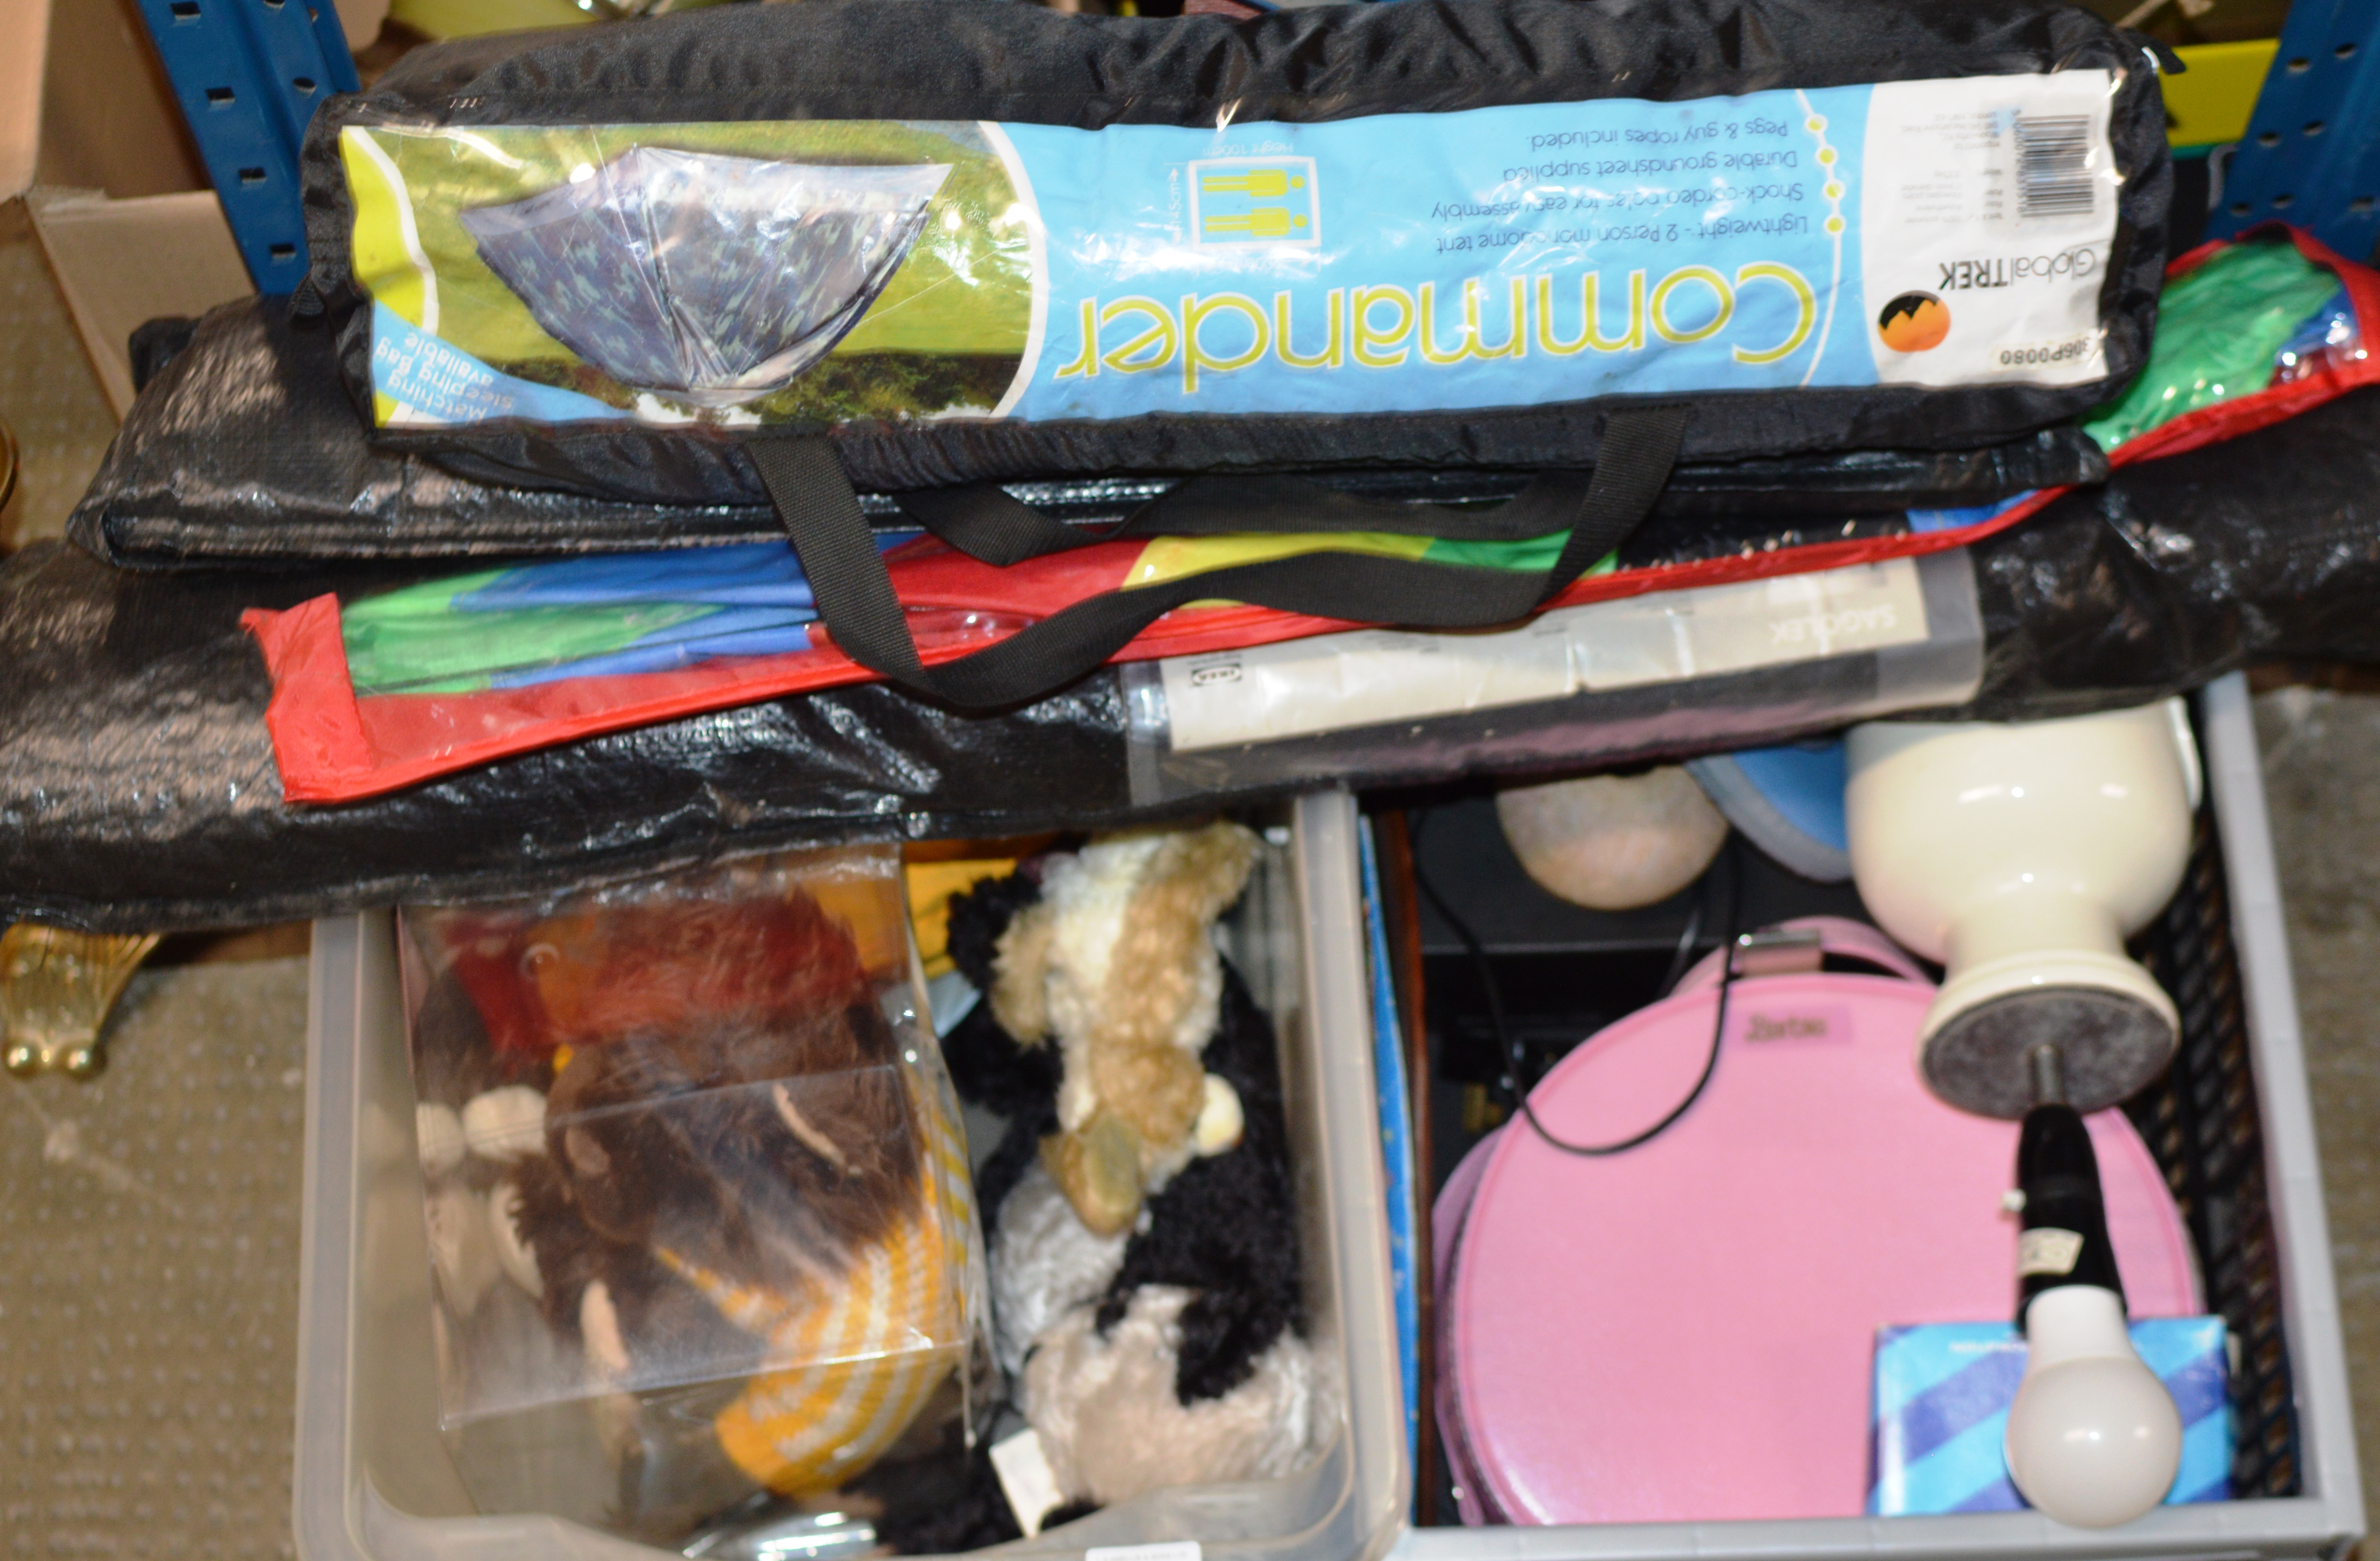 VARIOUS CAMPING ACCESSORIES & 2 BOXES WITH TABLE LAMP, VARIOUS SOFT TOYS, SUNDRIES ETC